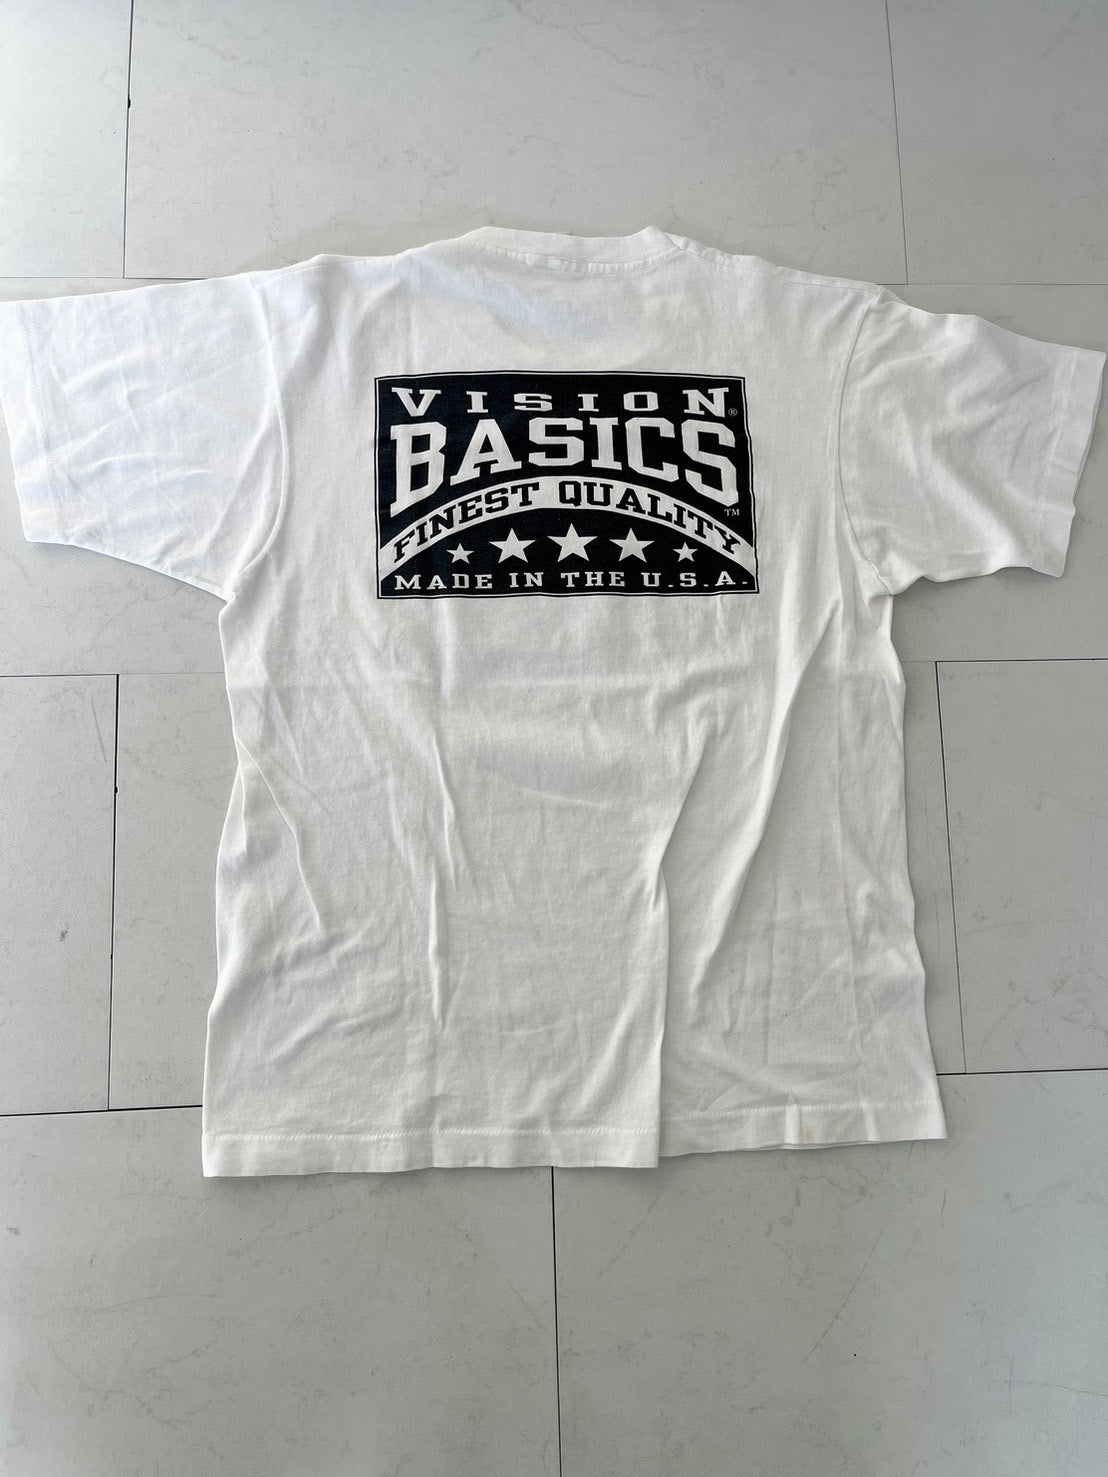 【VISION】90's VISION STREET WEAR Print T-shirt Made in USA (men's L)